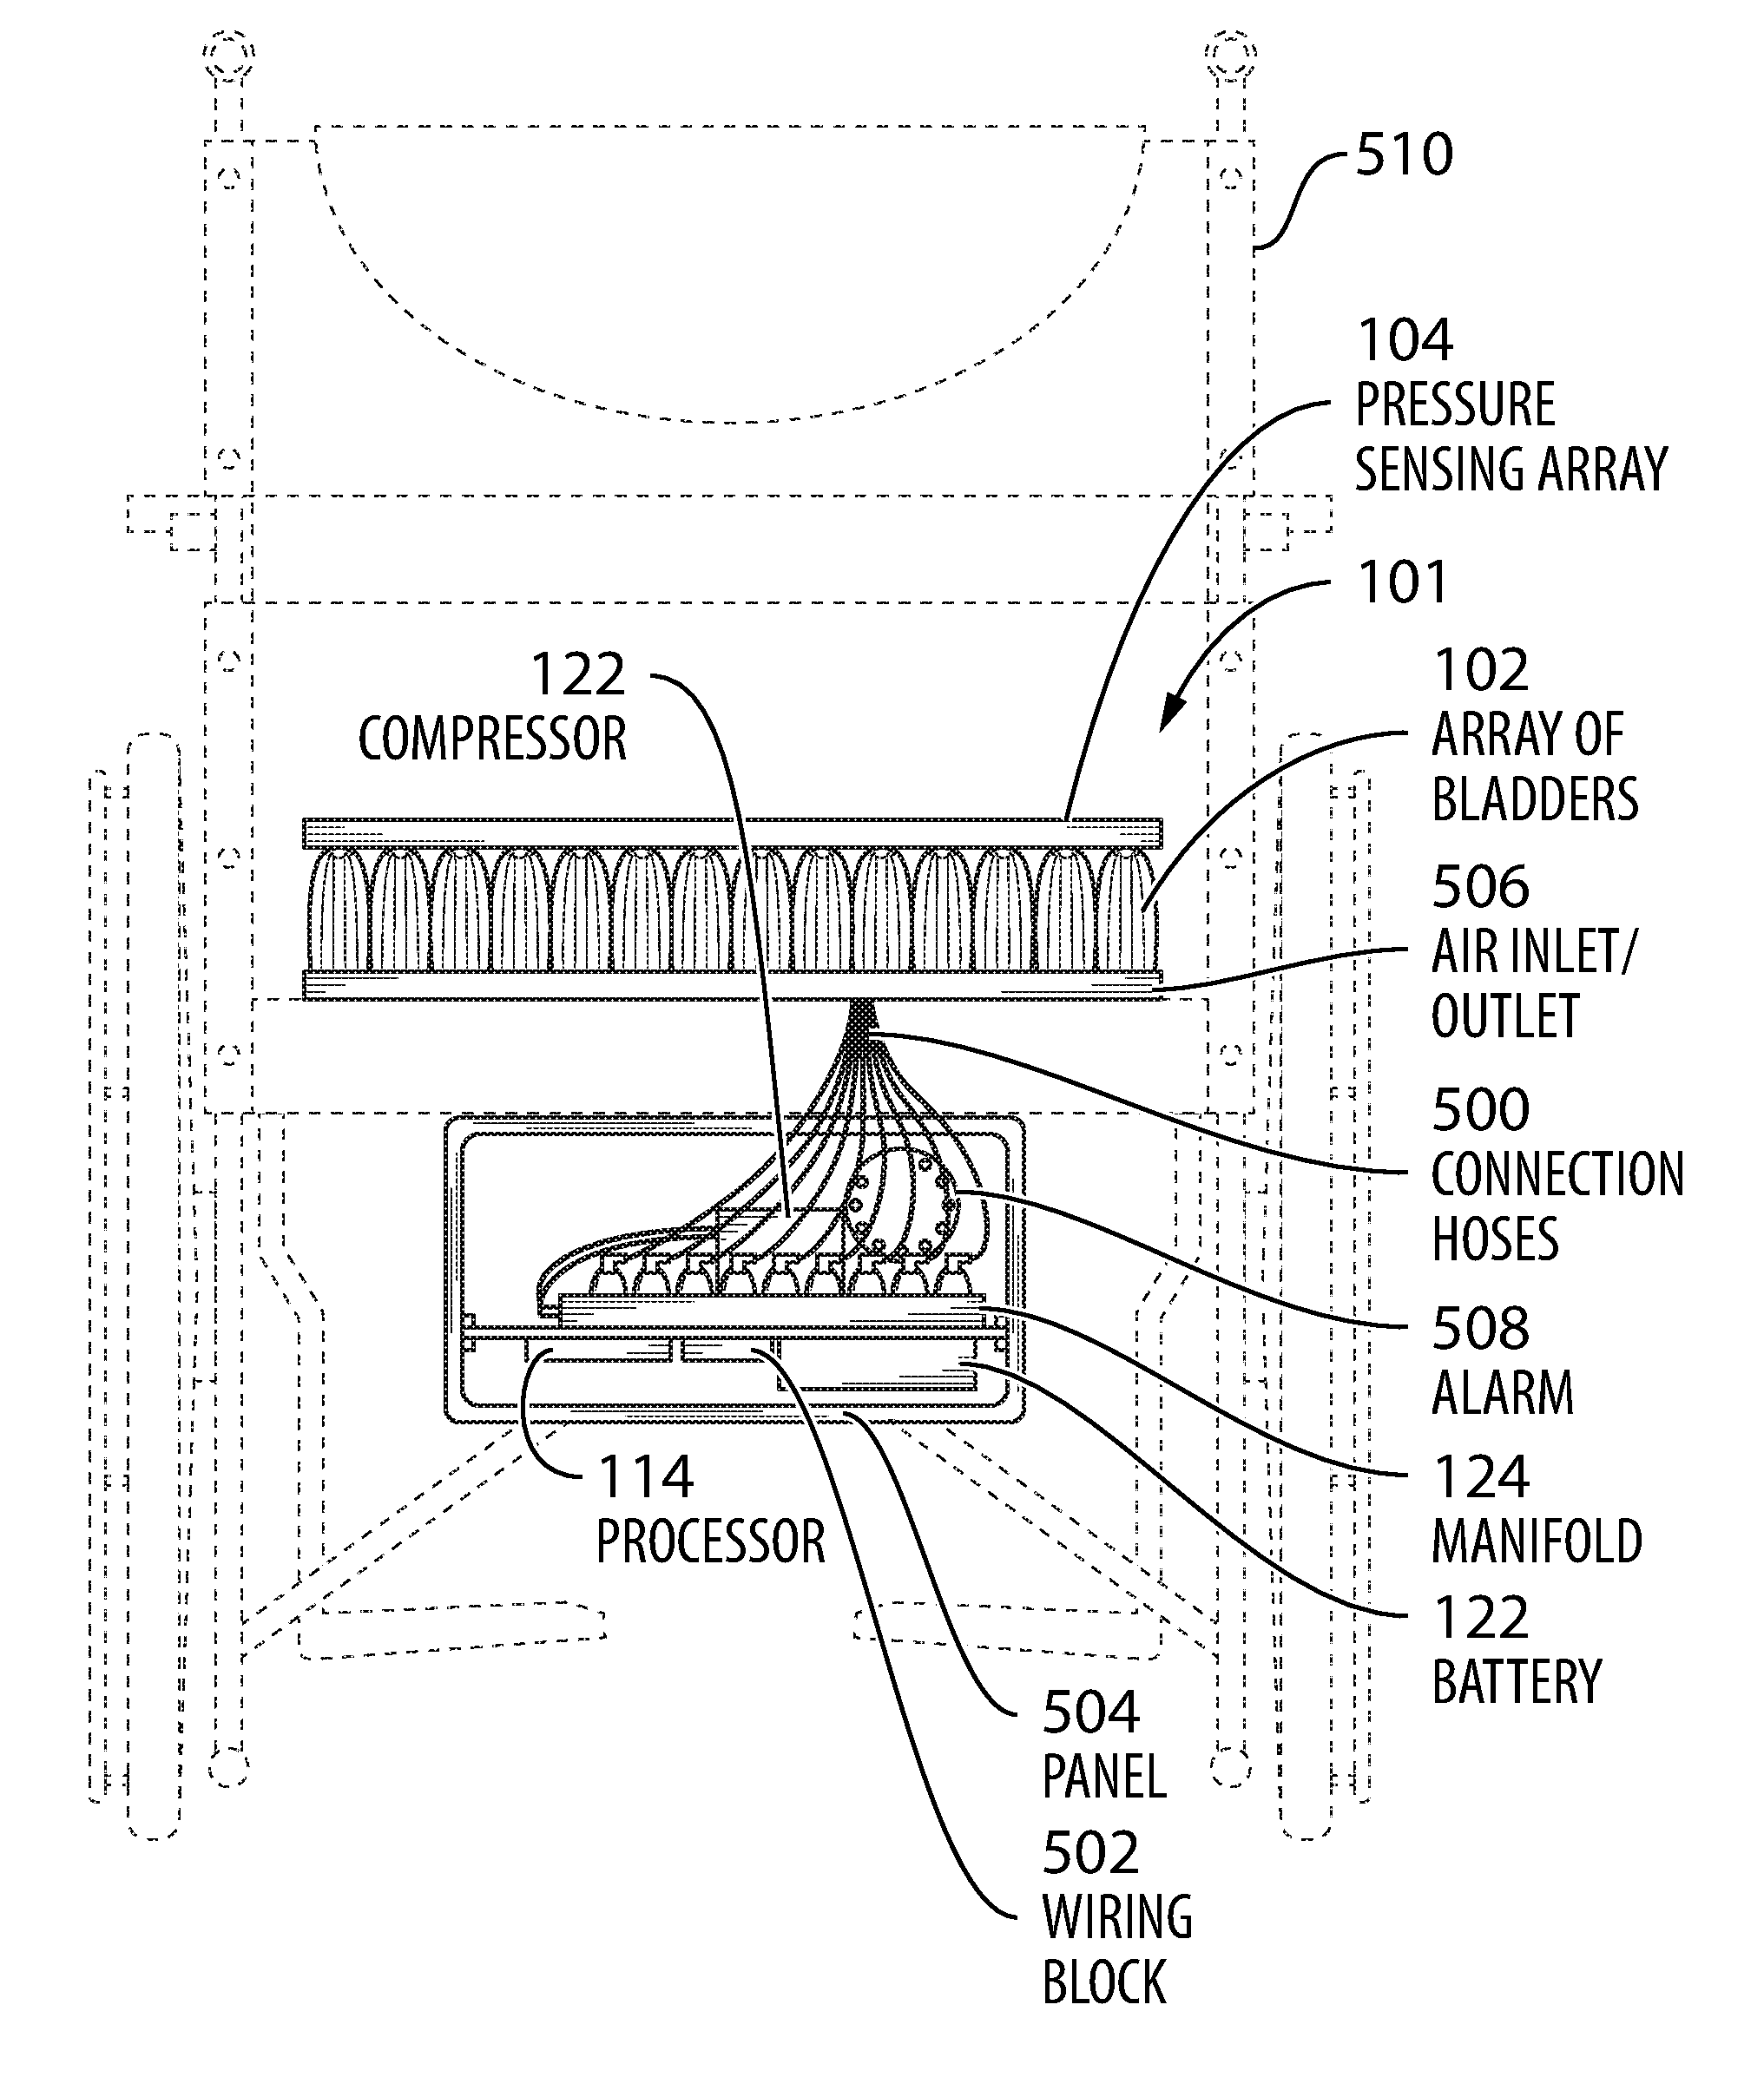 Cushion with bladders running different pressurization modes inside and outside dynamically selected target bladder group